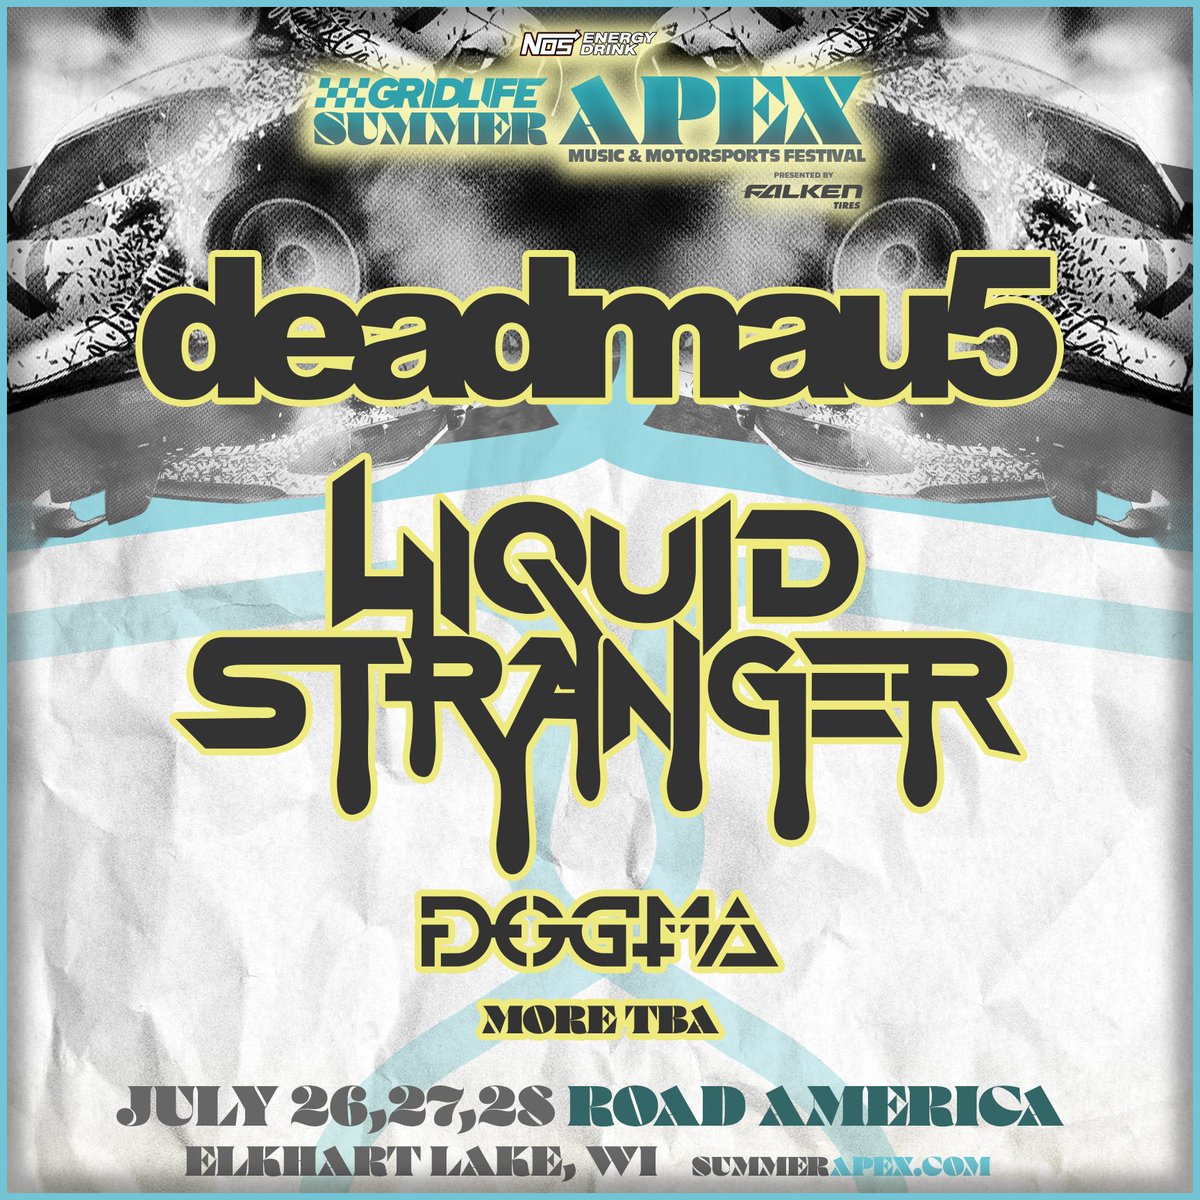 SUMMER APEX LINE UP IS HERE 🗣️ @deadmau5, @LiquidStranger, & @DOGMAmusique & more TBA take on @RoadAmerica on July 26th - July 28th 🔥 See you at the finish line 🐭💧🐕 More info → summerapex.com